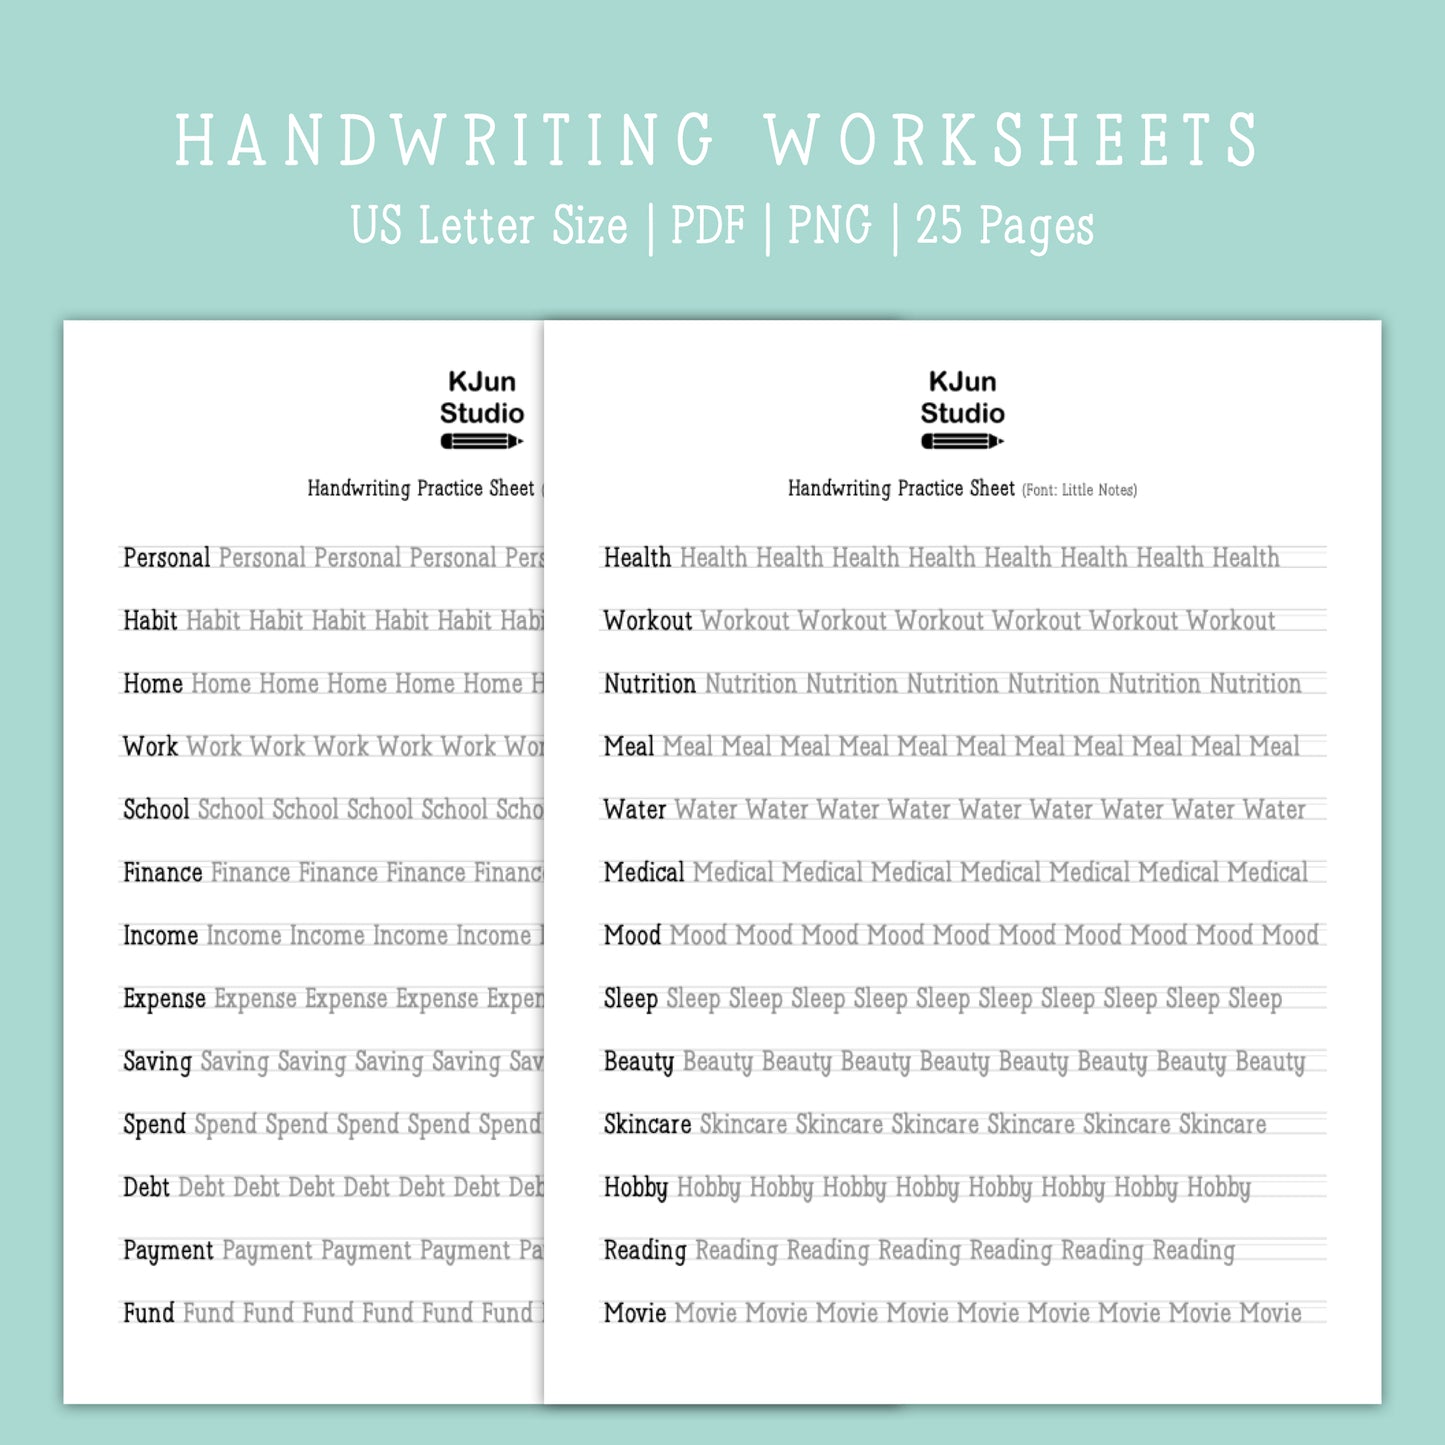 Handwriting Practice Sheets - Little Notes Font